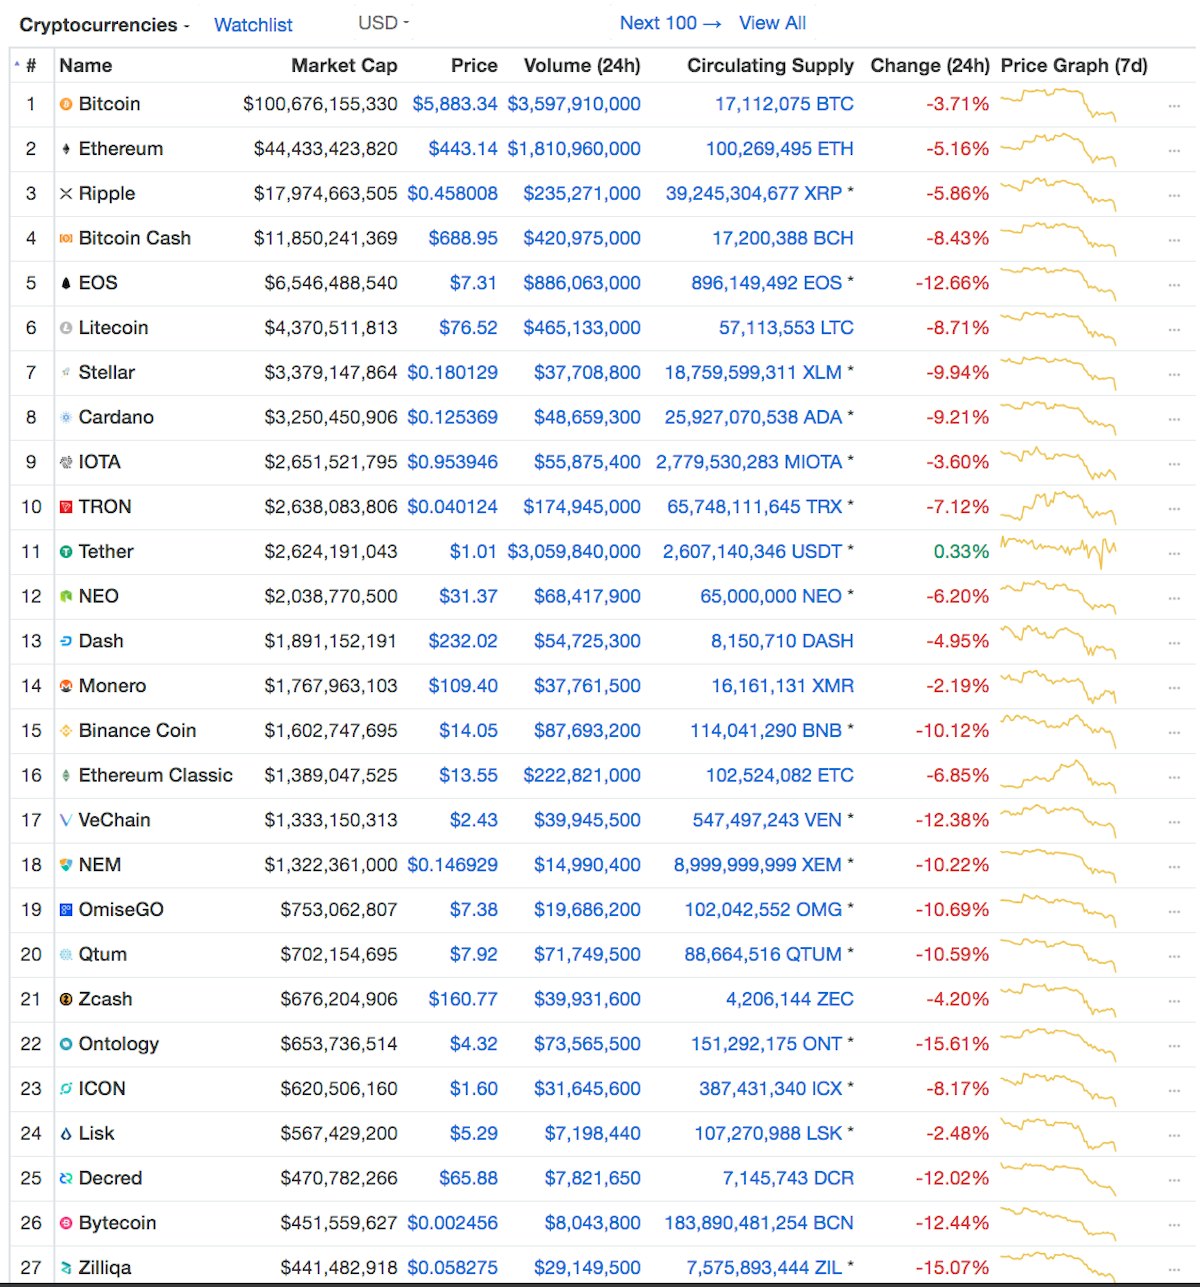 featured image - How Many Cryptocurrencies Are Simply Following the Market?